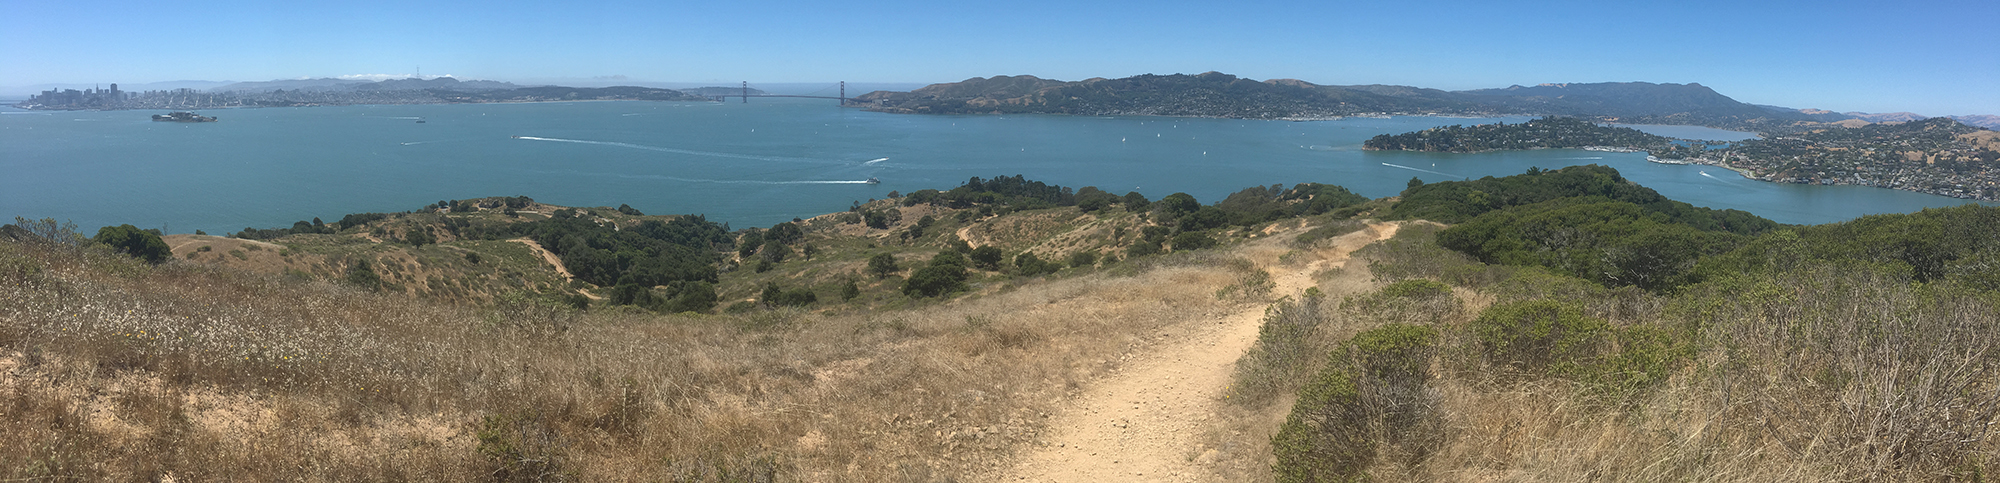 Angel Island View from Top